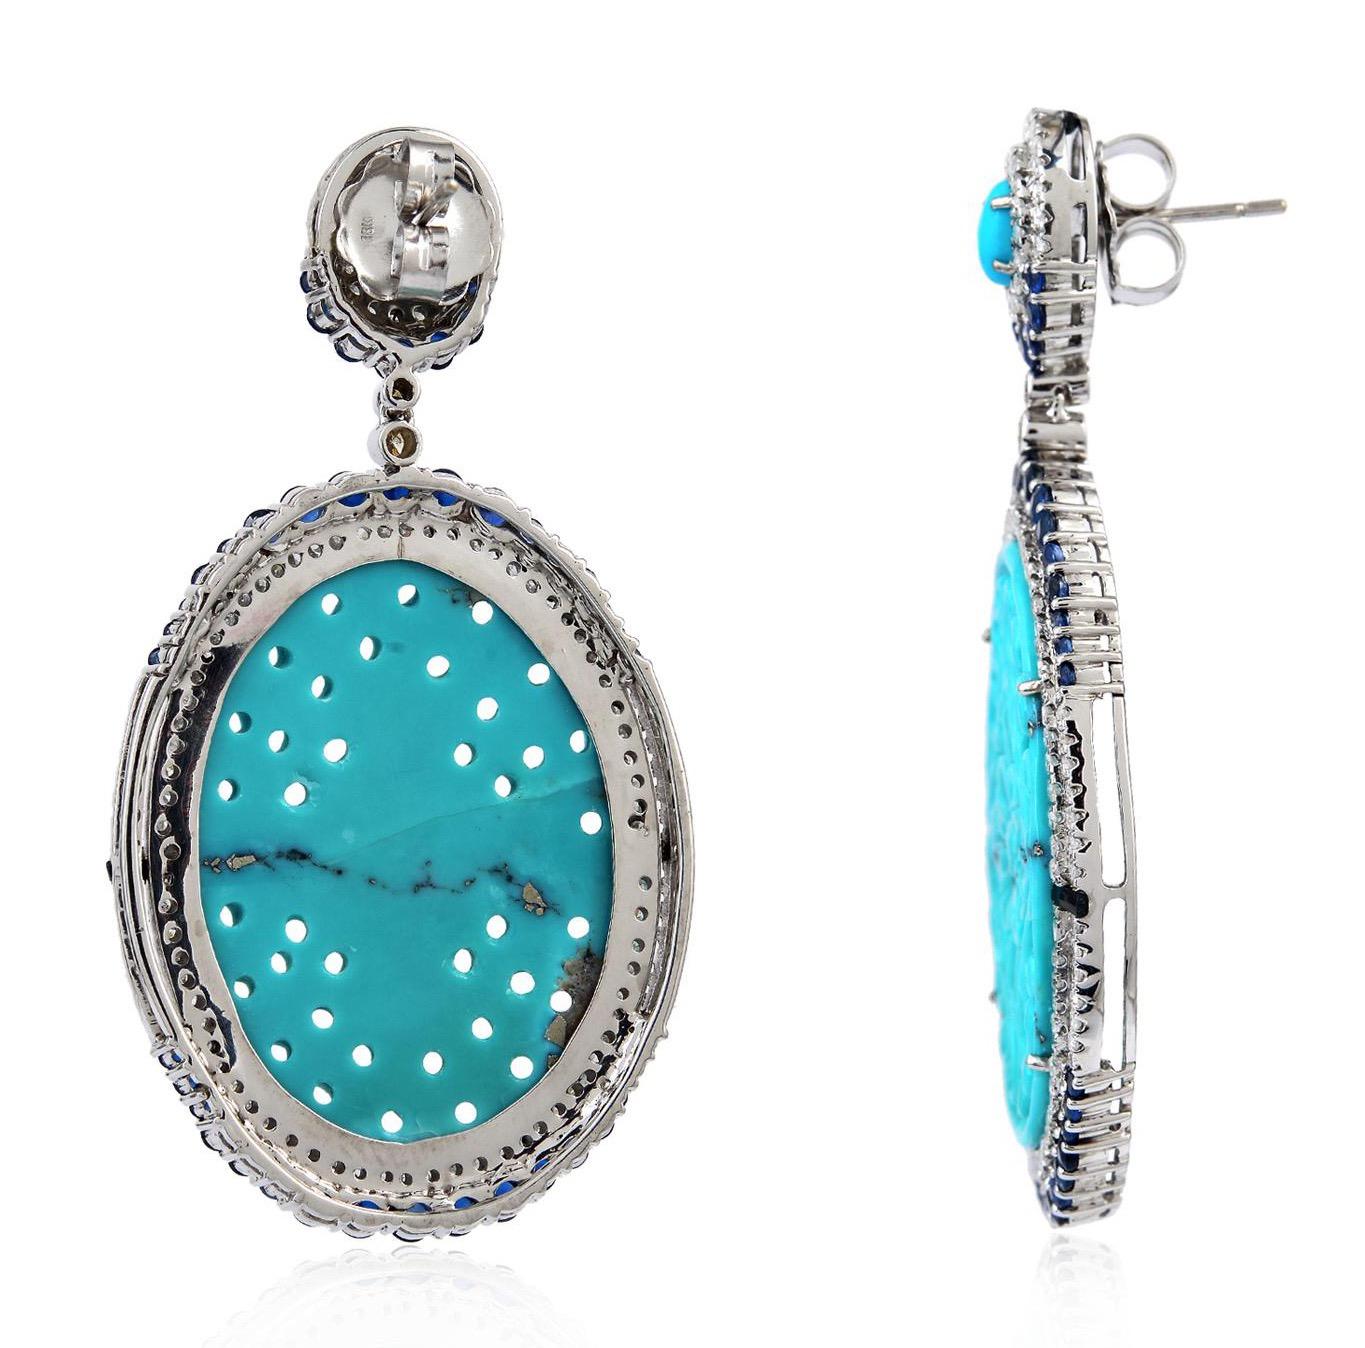 Cast from 18-karat gold and sterling silver.  These earrings are set in 45.05 carats turquoise, 4.41 carats blue sapphire and 2.17-carats of diamonds.

FOLLOW  MEGHNA JEWELS storefront to view the latest collection & exclusive pieces.  Meghna Jewels